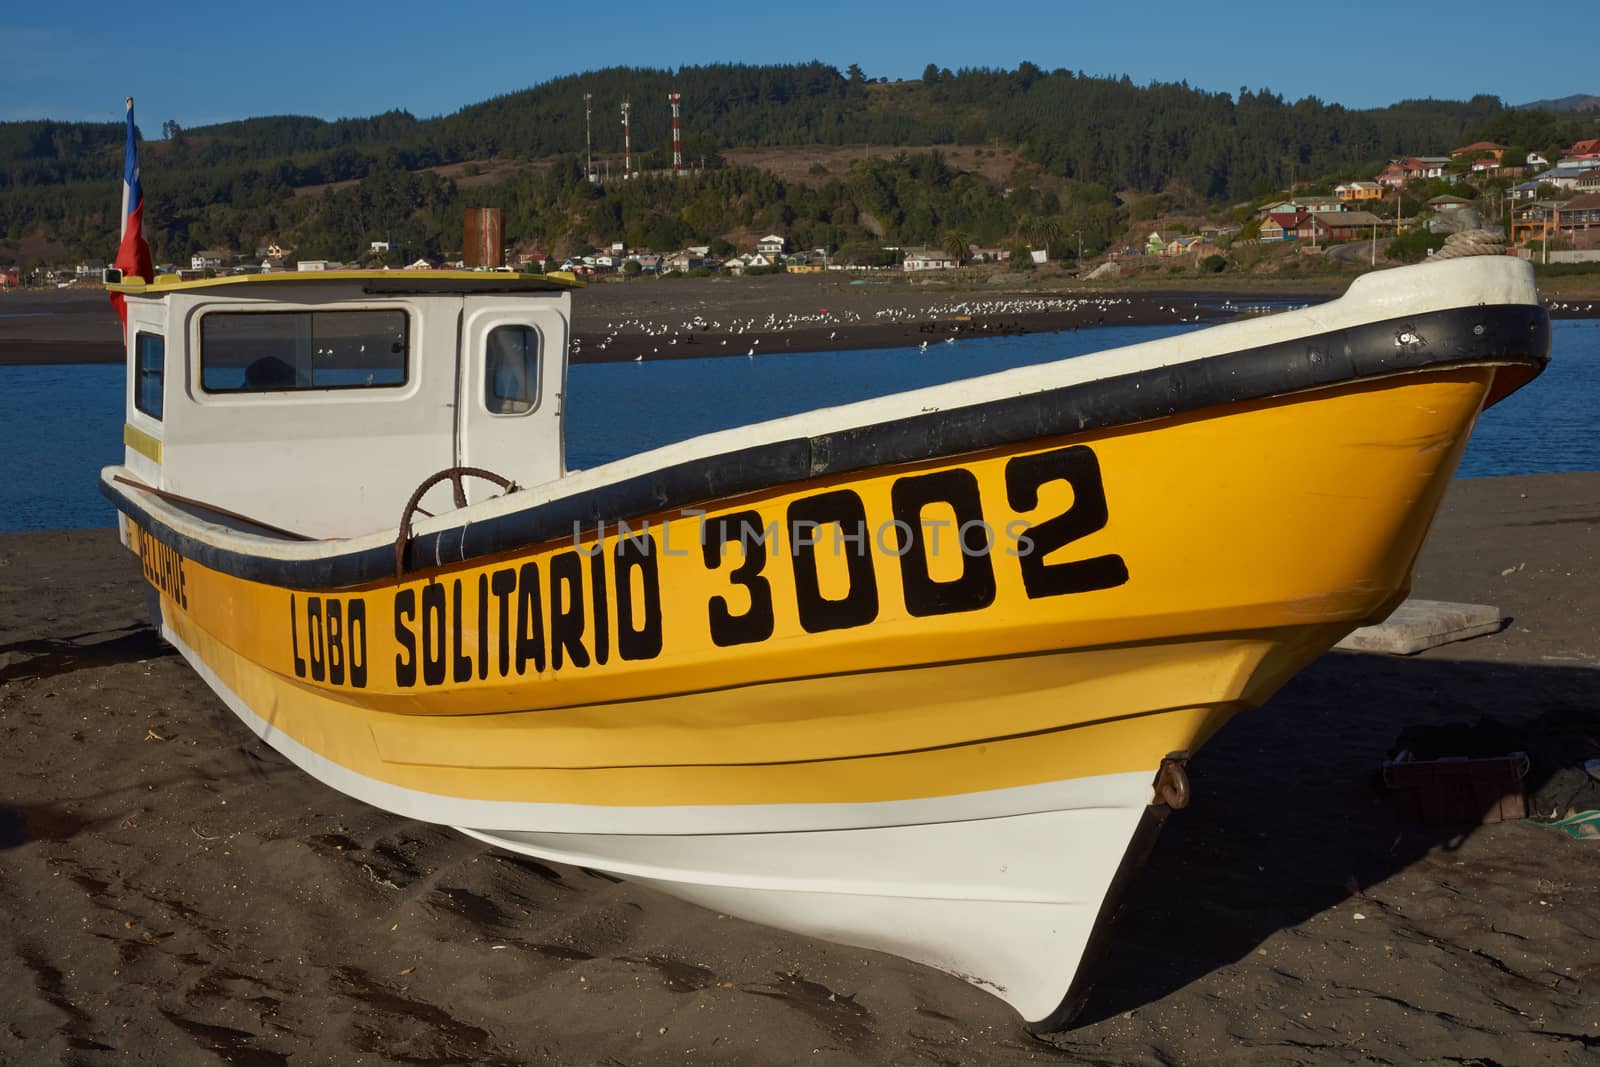 Colourful fishing boat on the beach in the small fishing village of Curanipe in the Maule Region of Chile.